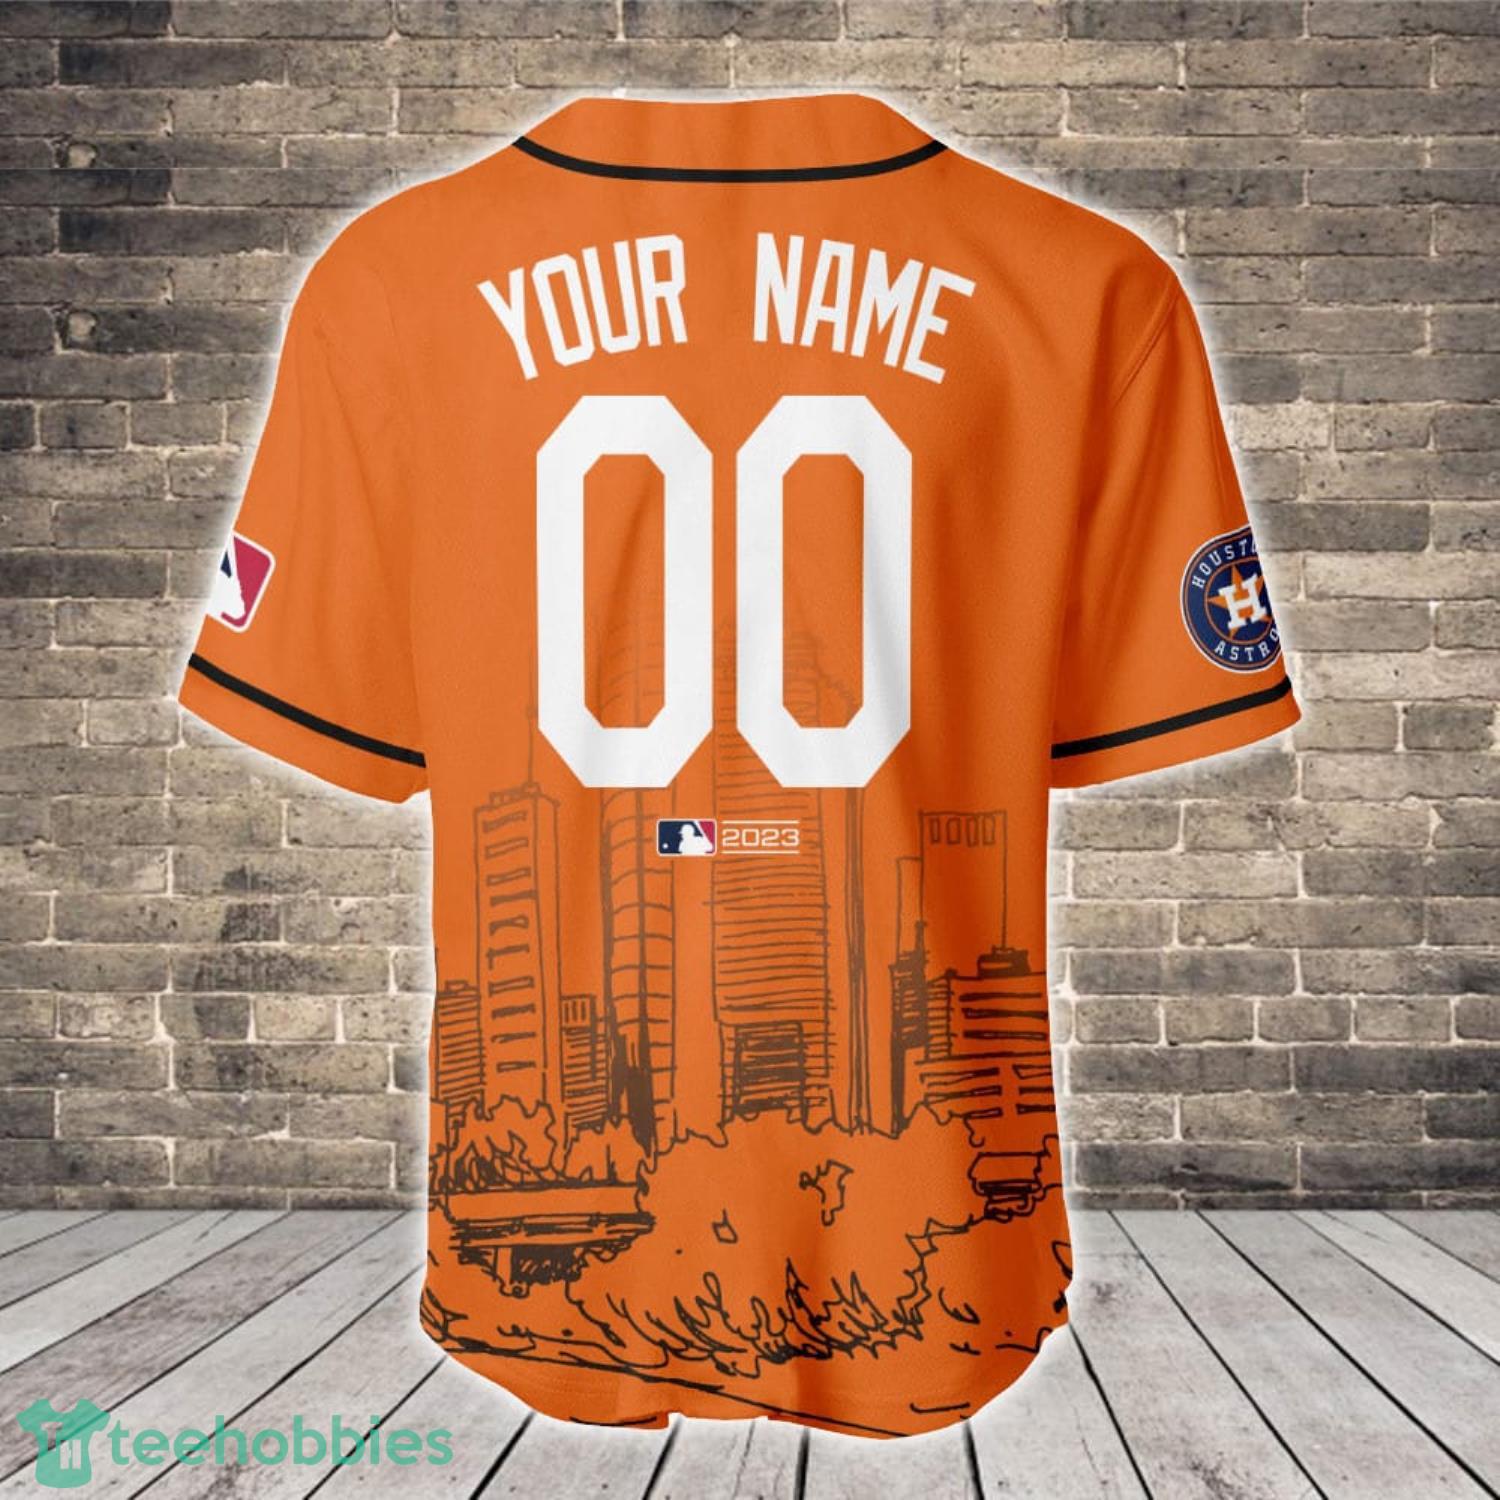 Best Astros gear and jerseys to show off your Houston pride this